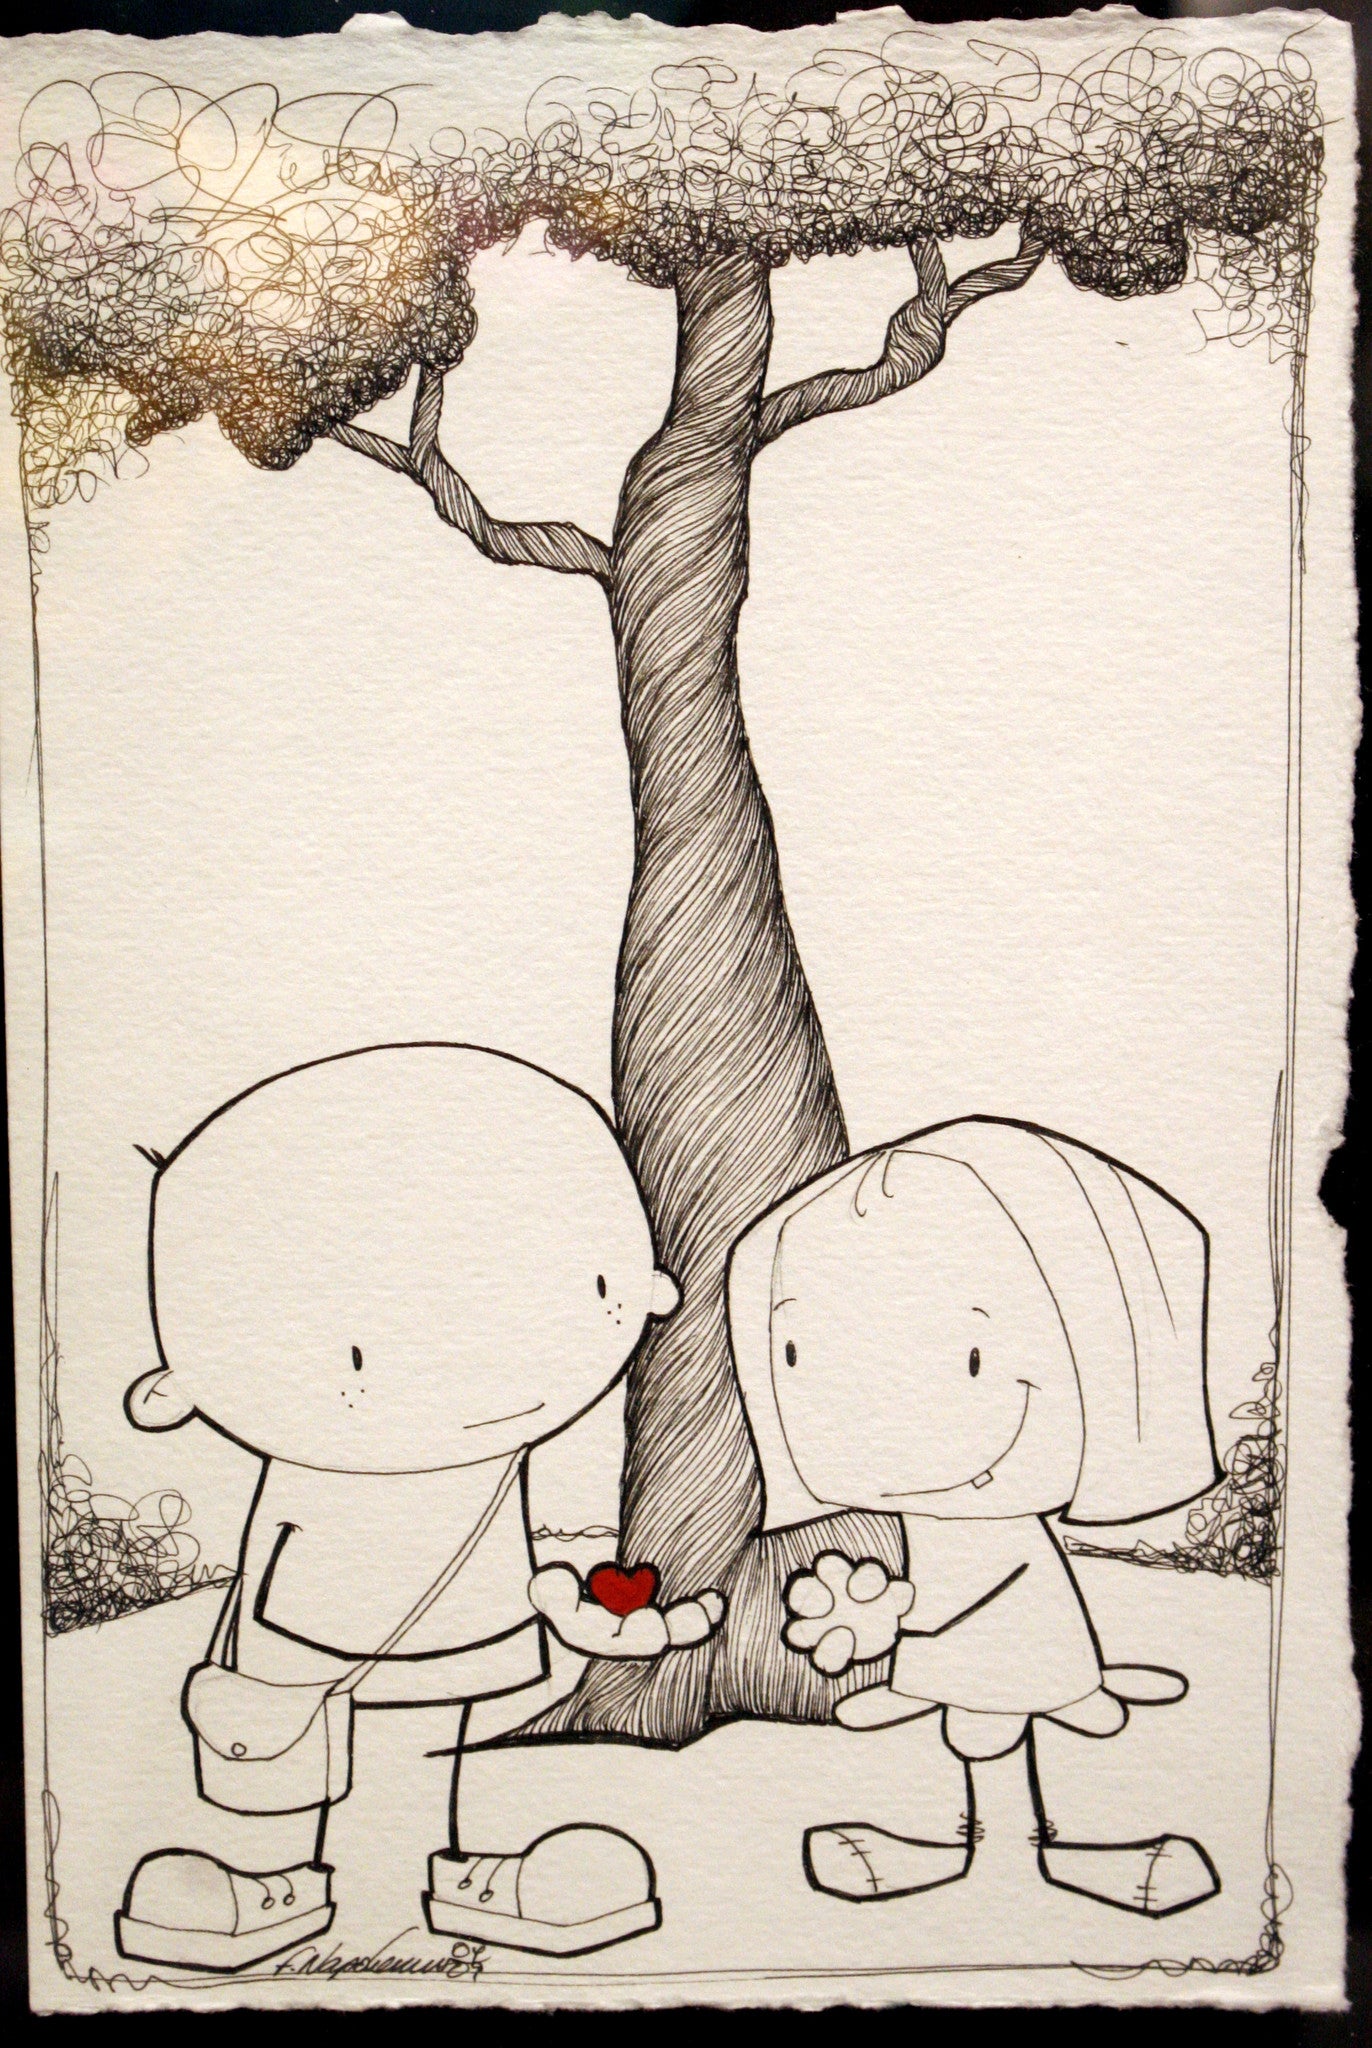 Fabio Napoleoni "What to Share This with You" Original Pen and Ink